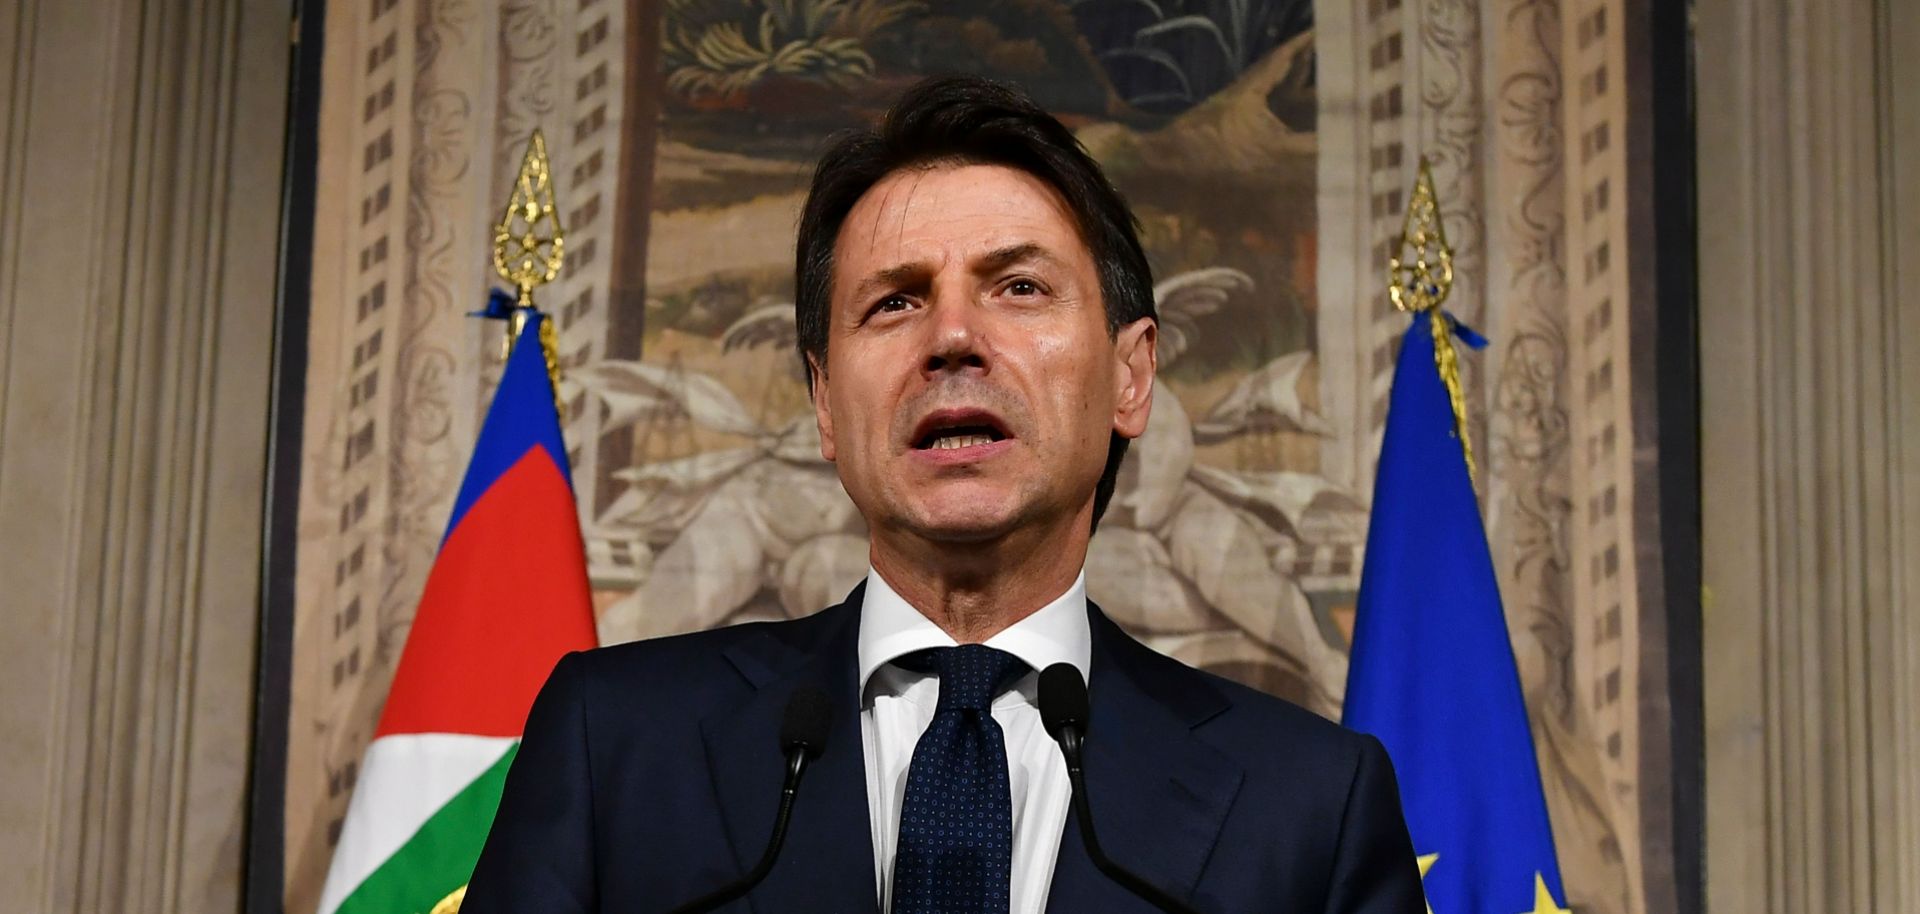 Giuseppe Conte addresses journalists after a meeting with Italian President Sergio Mattarella on May 27 in Rome. Conte was subsequently named prime minister.